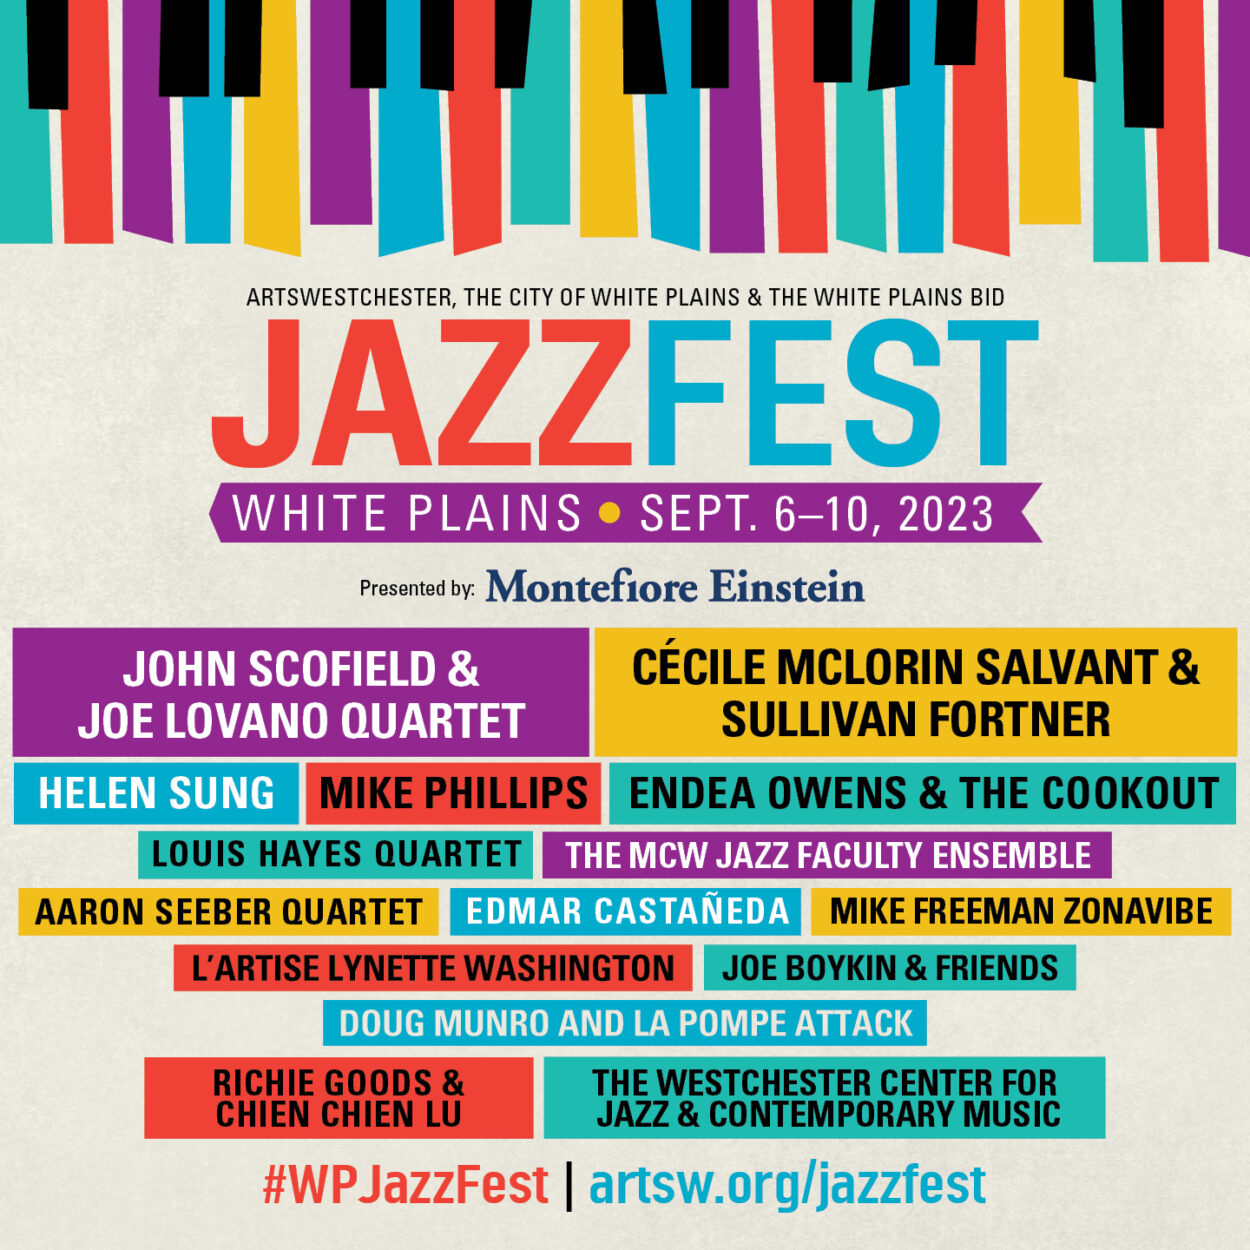 JazzFest White Plains is back and better than ever! - Stacyknows